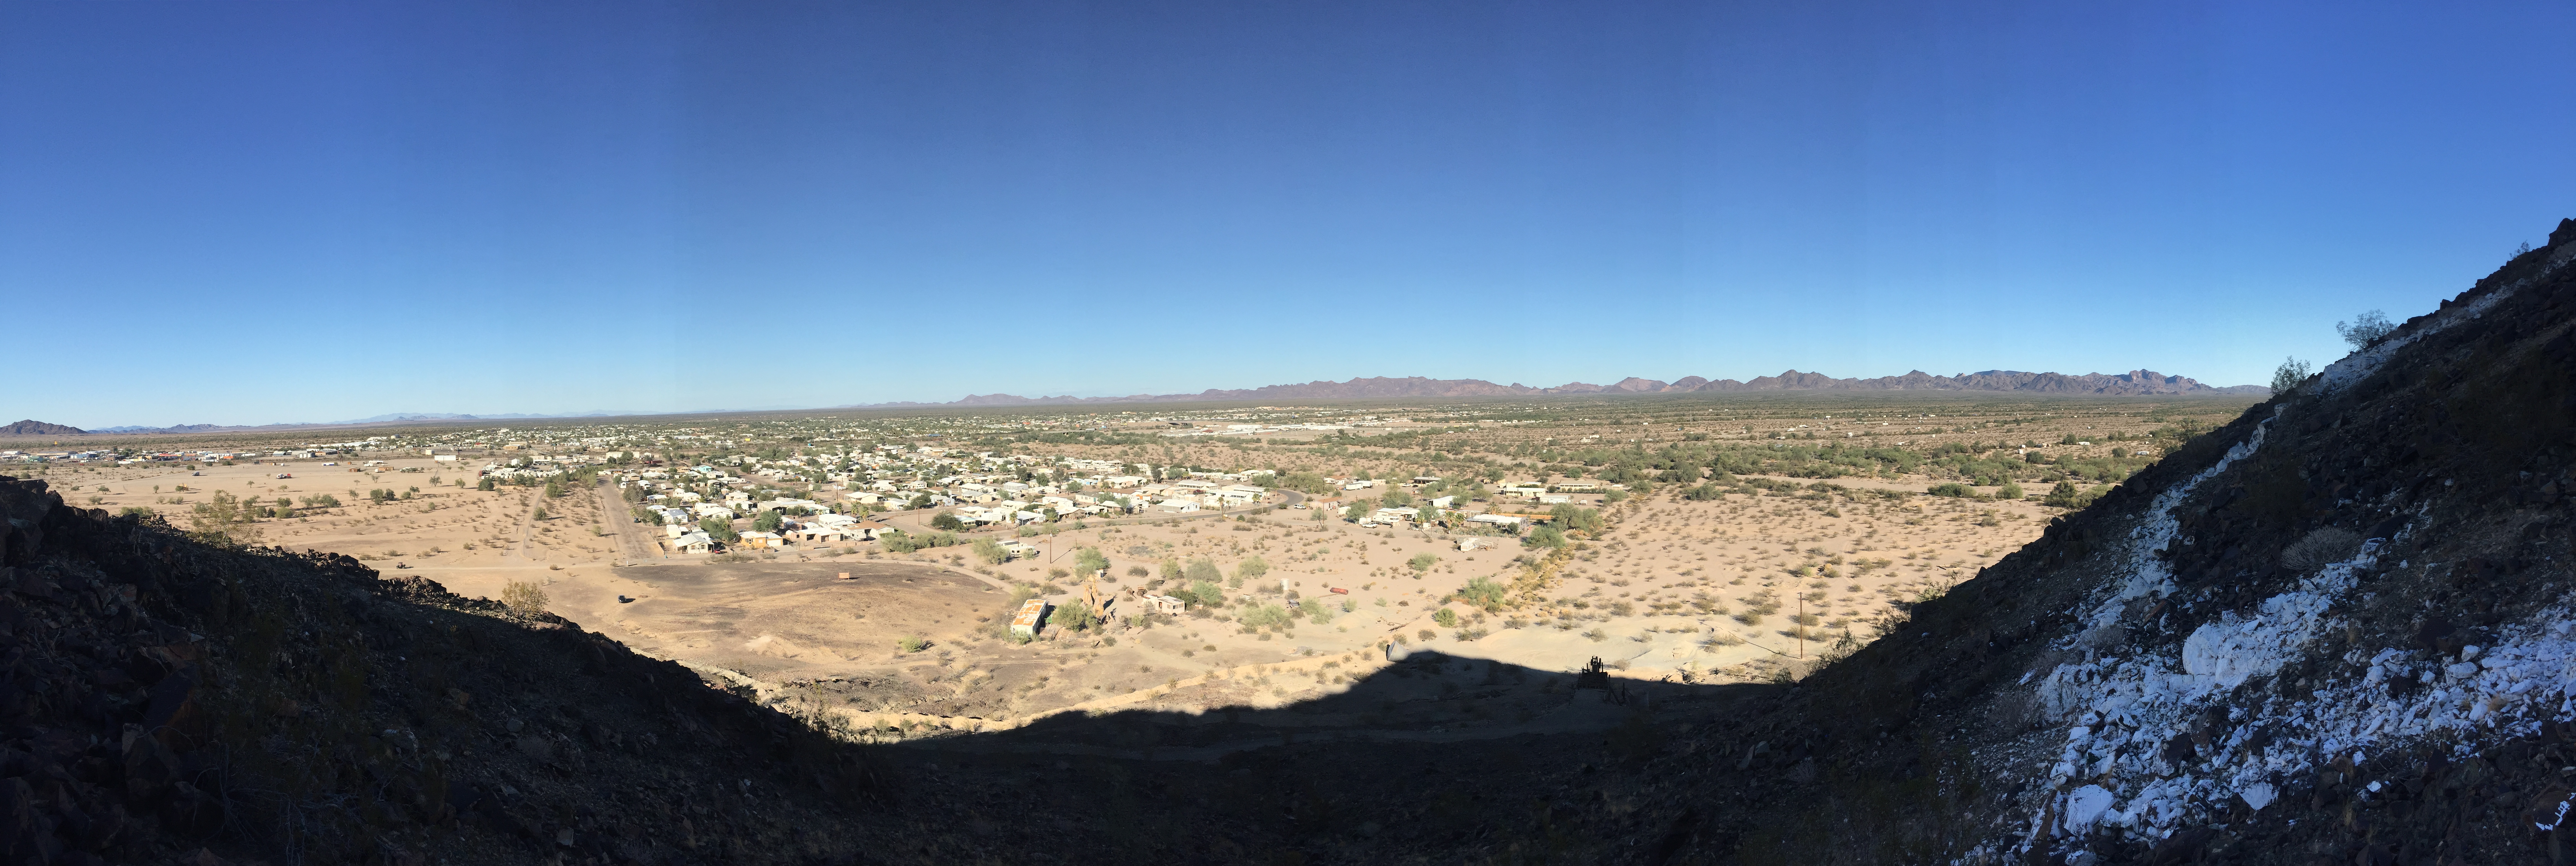 The view of Quartzsite from Q Mountain. According to the 2010 census, the population is 3,677. 